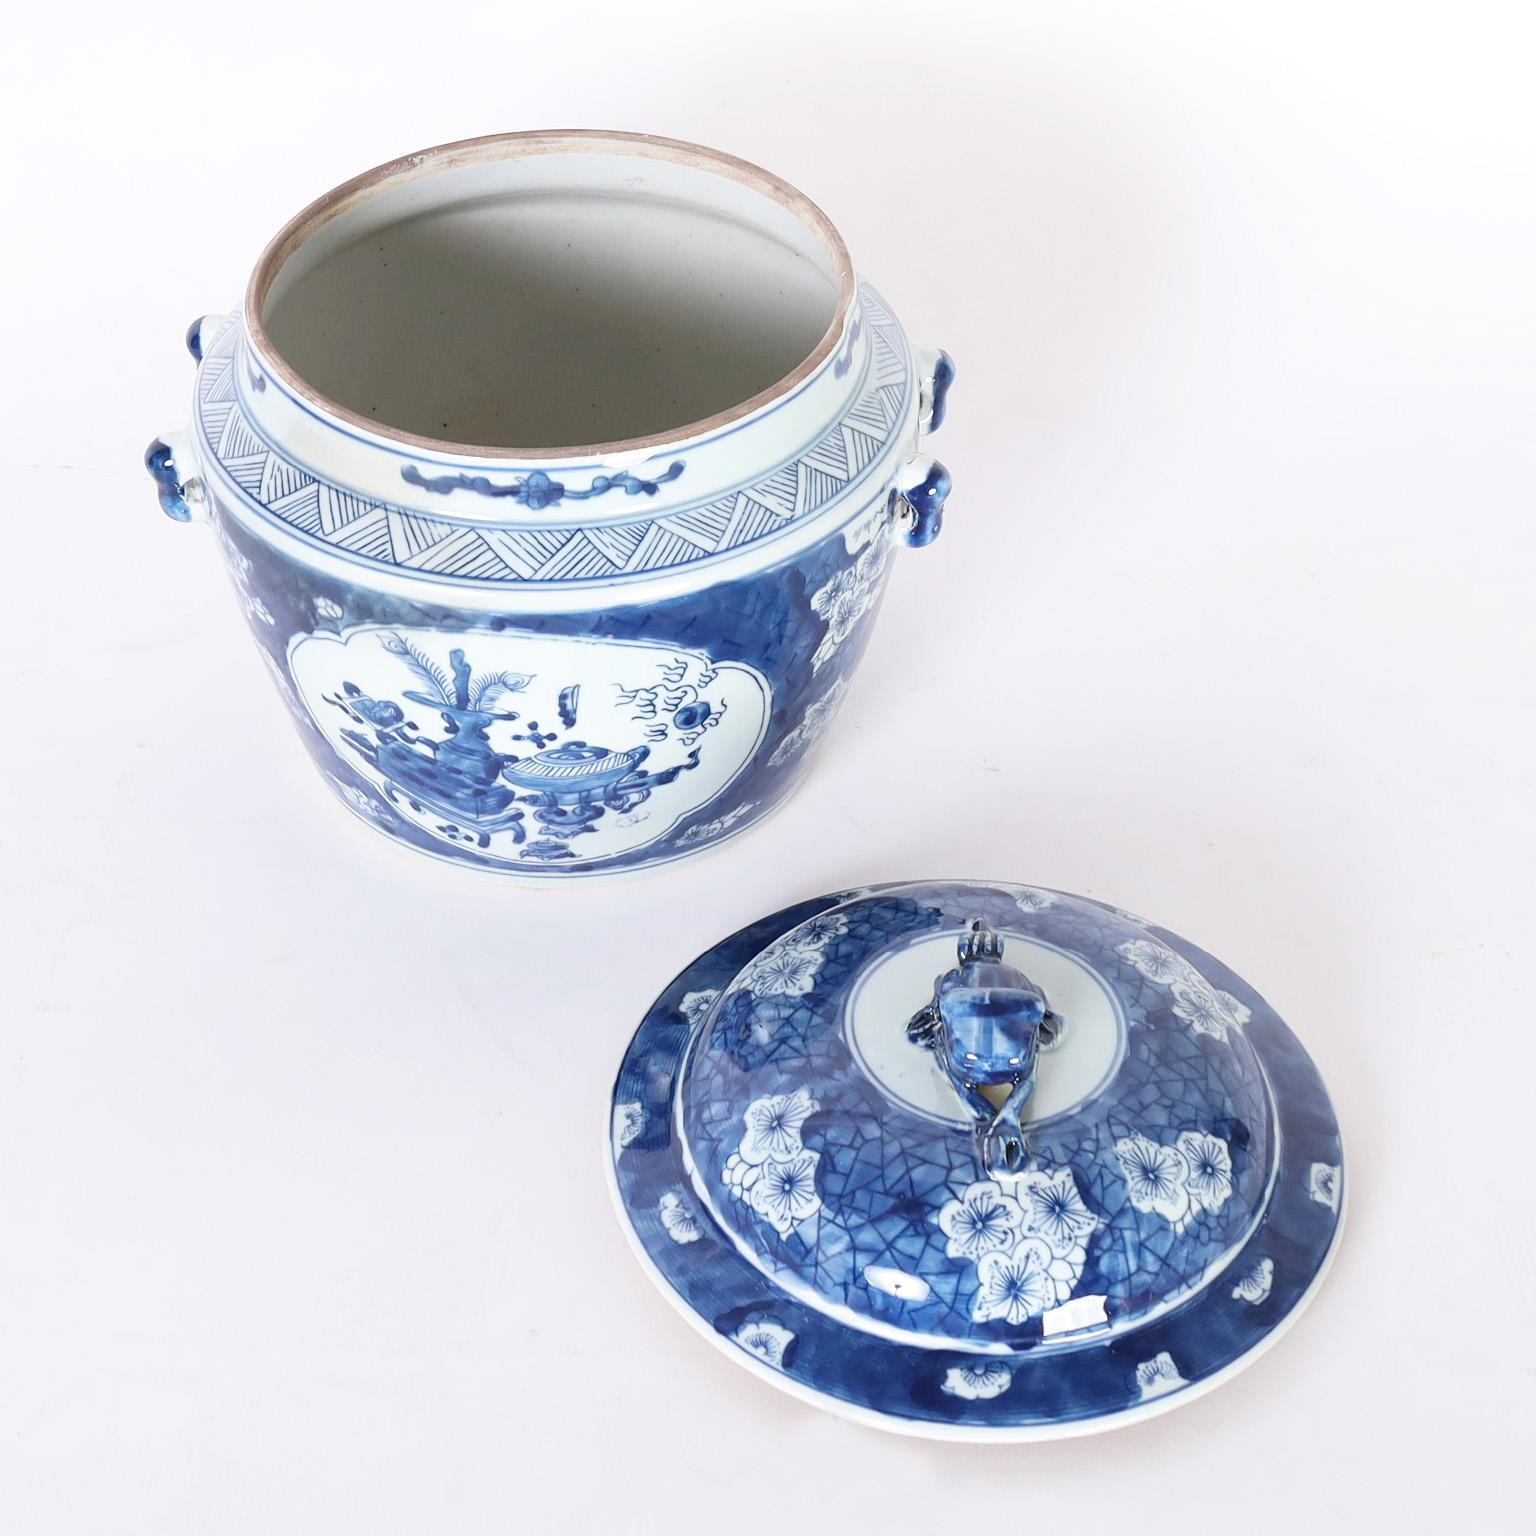 20th Century Pair of Blue and White Porcelain Lidded Pots